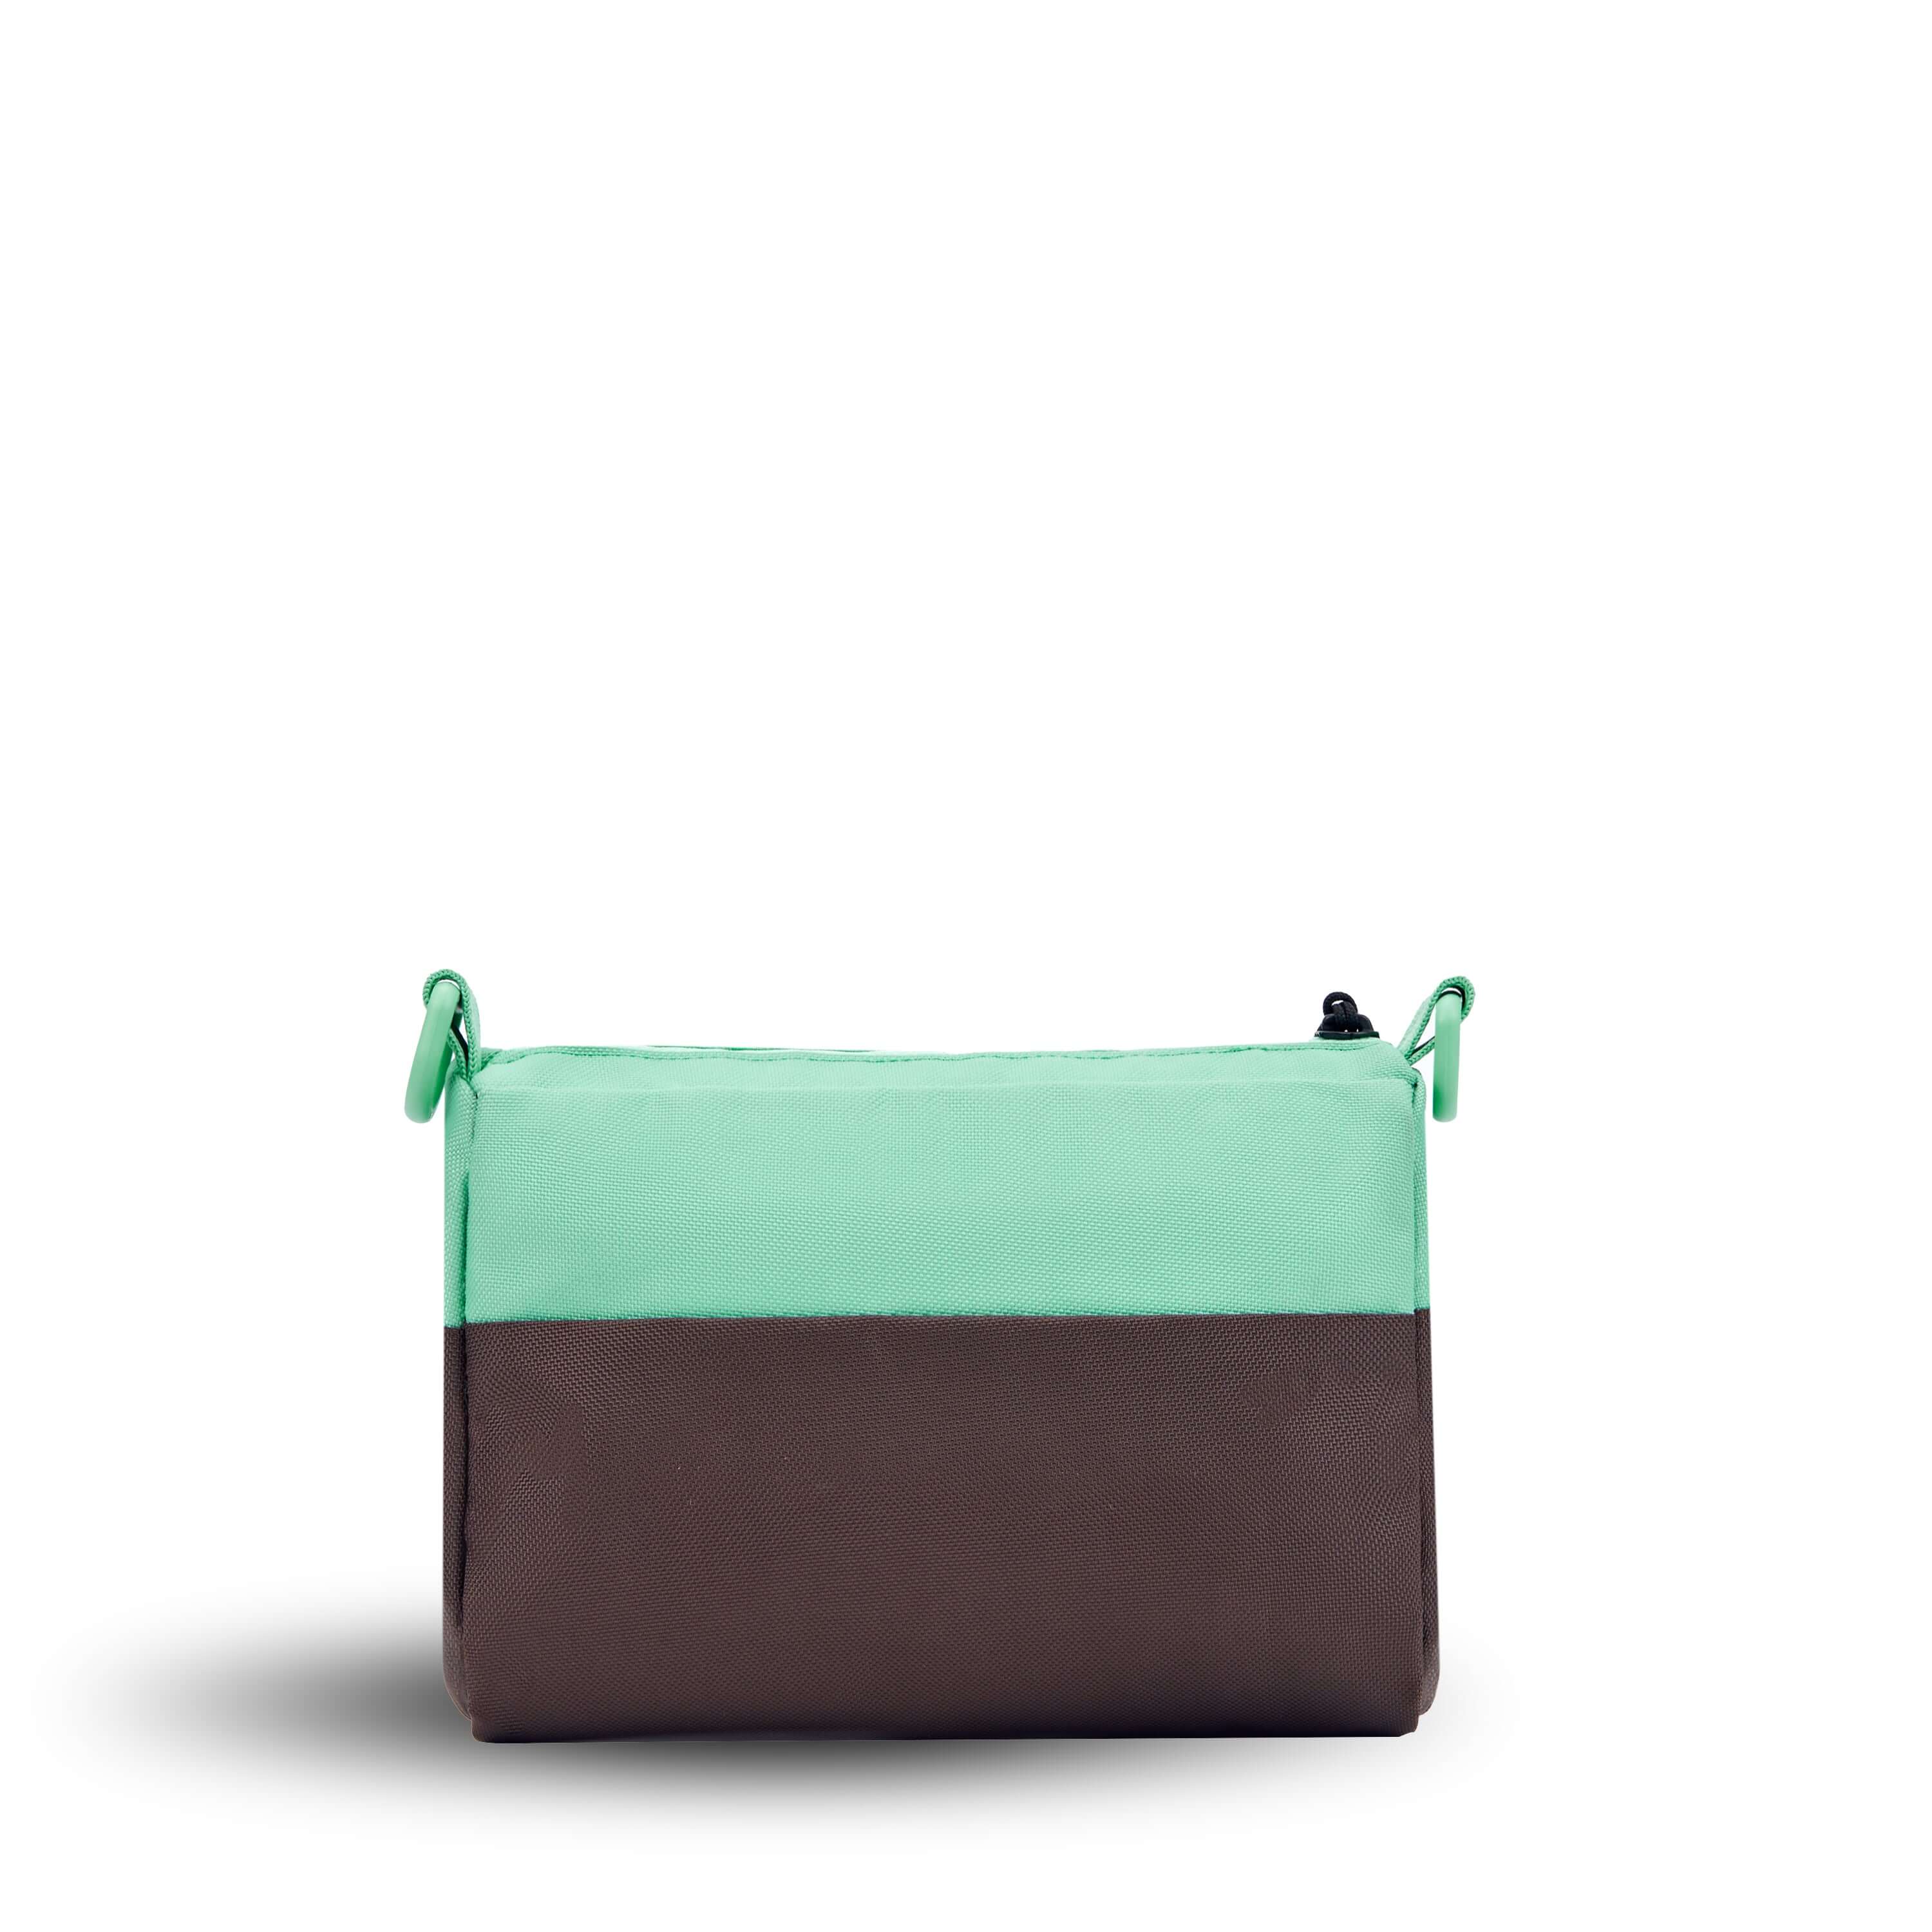 Back view of Sherpani's purse, the Skye in Seagreen. It is two-toned, the top half of the bag is light green and the bottom half of the bag is brown. 